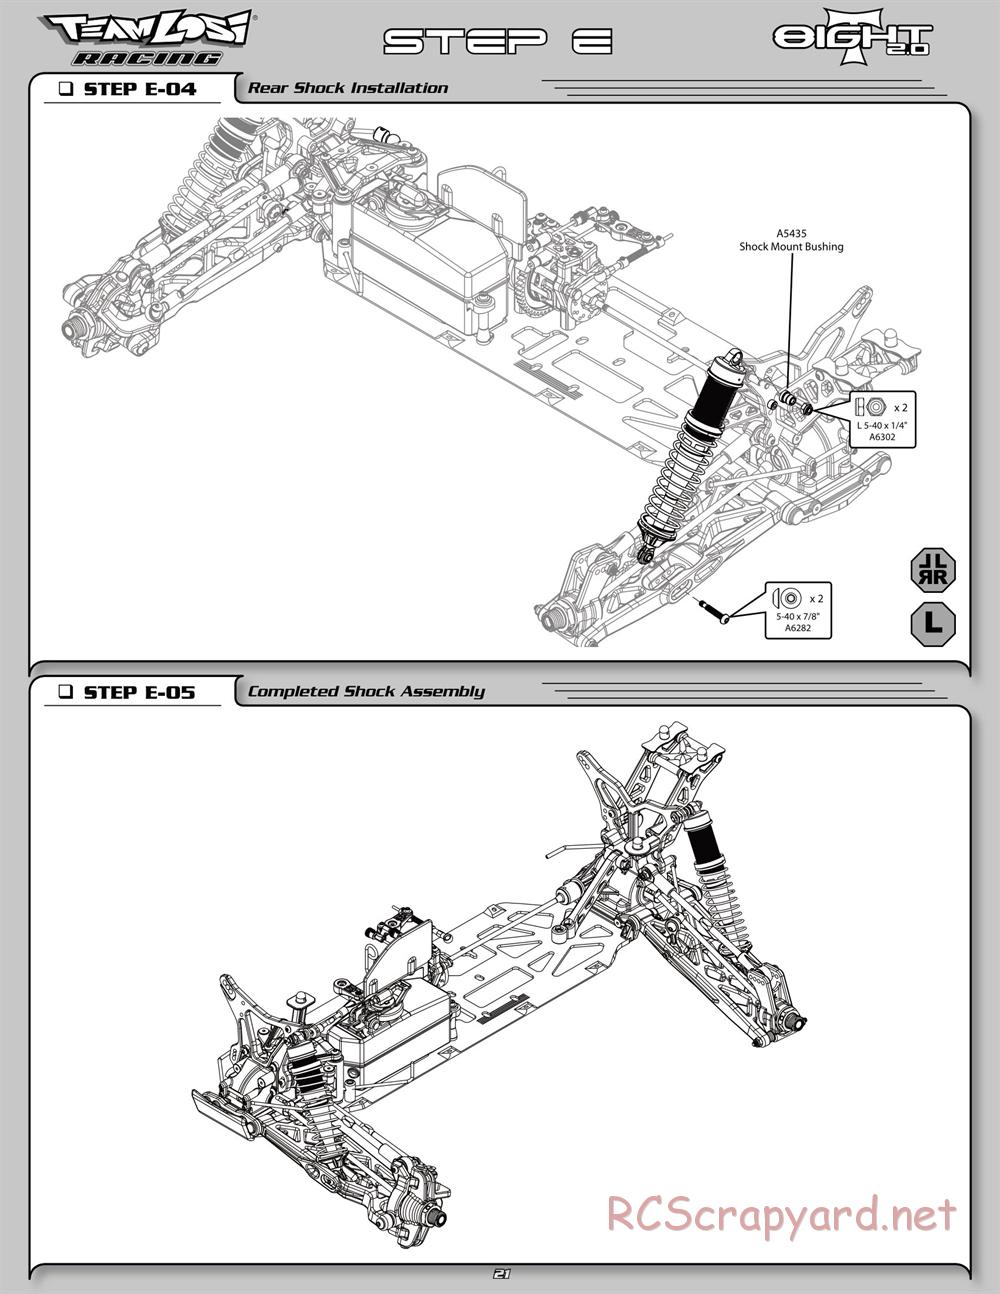 Team Losi - 8ight-T 2.0 Race Roller - Manual - Page 26